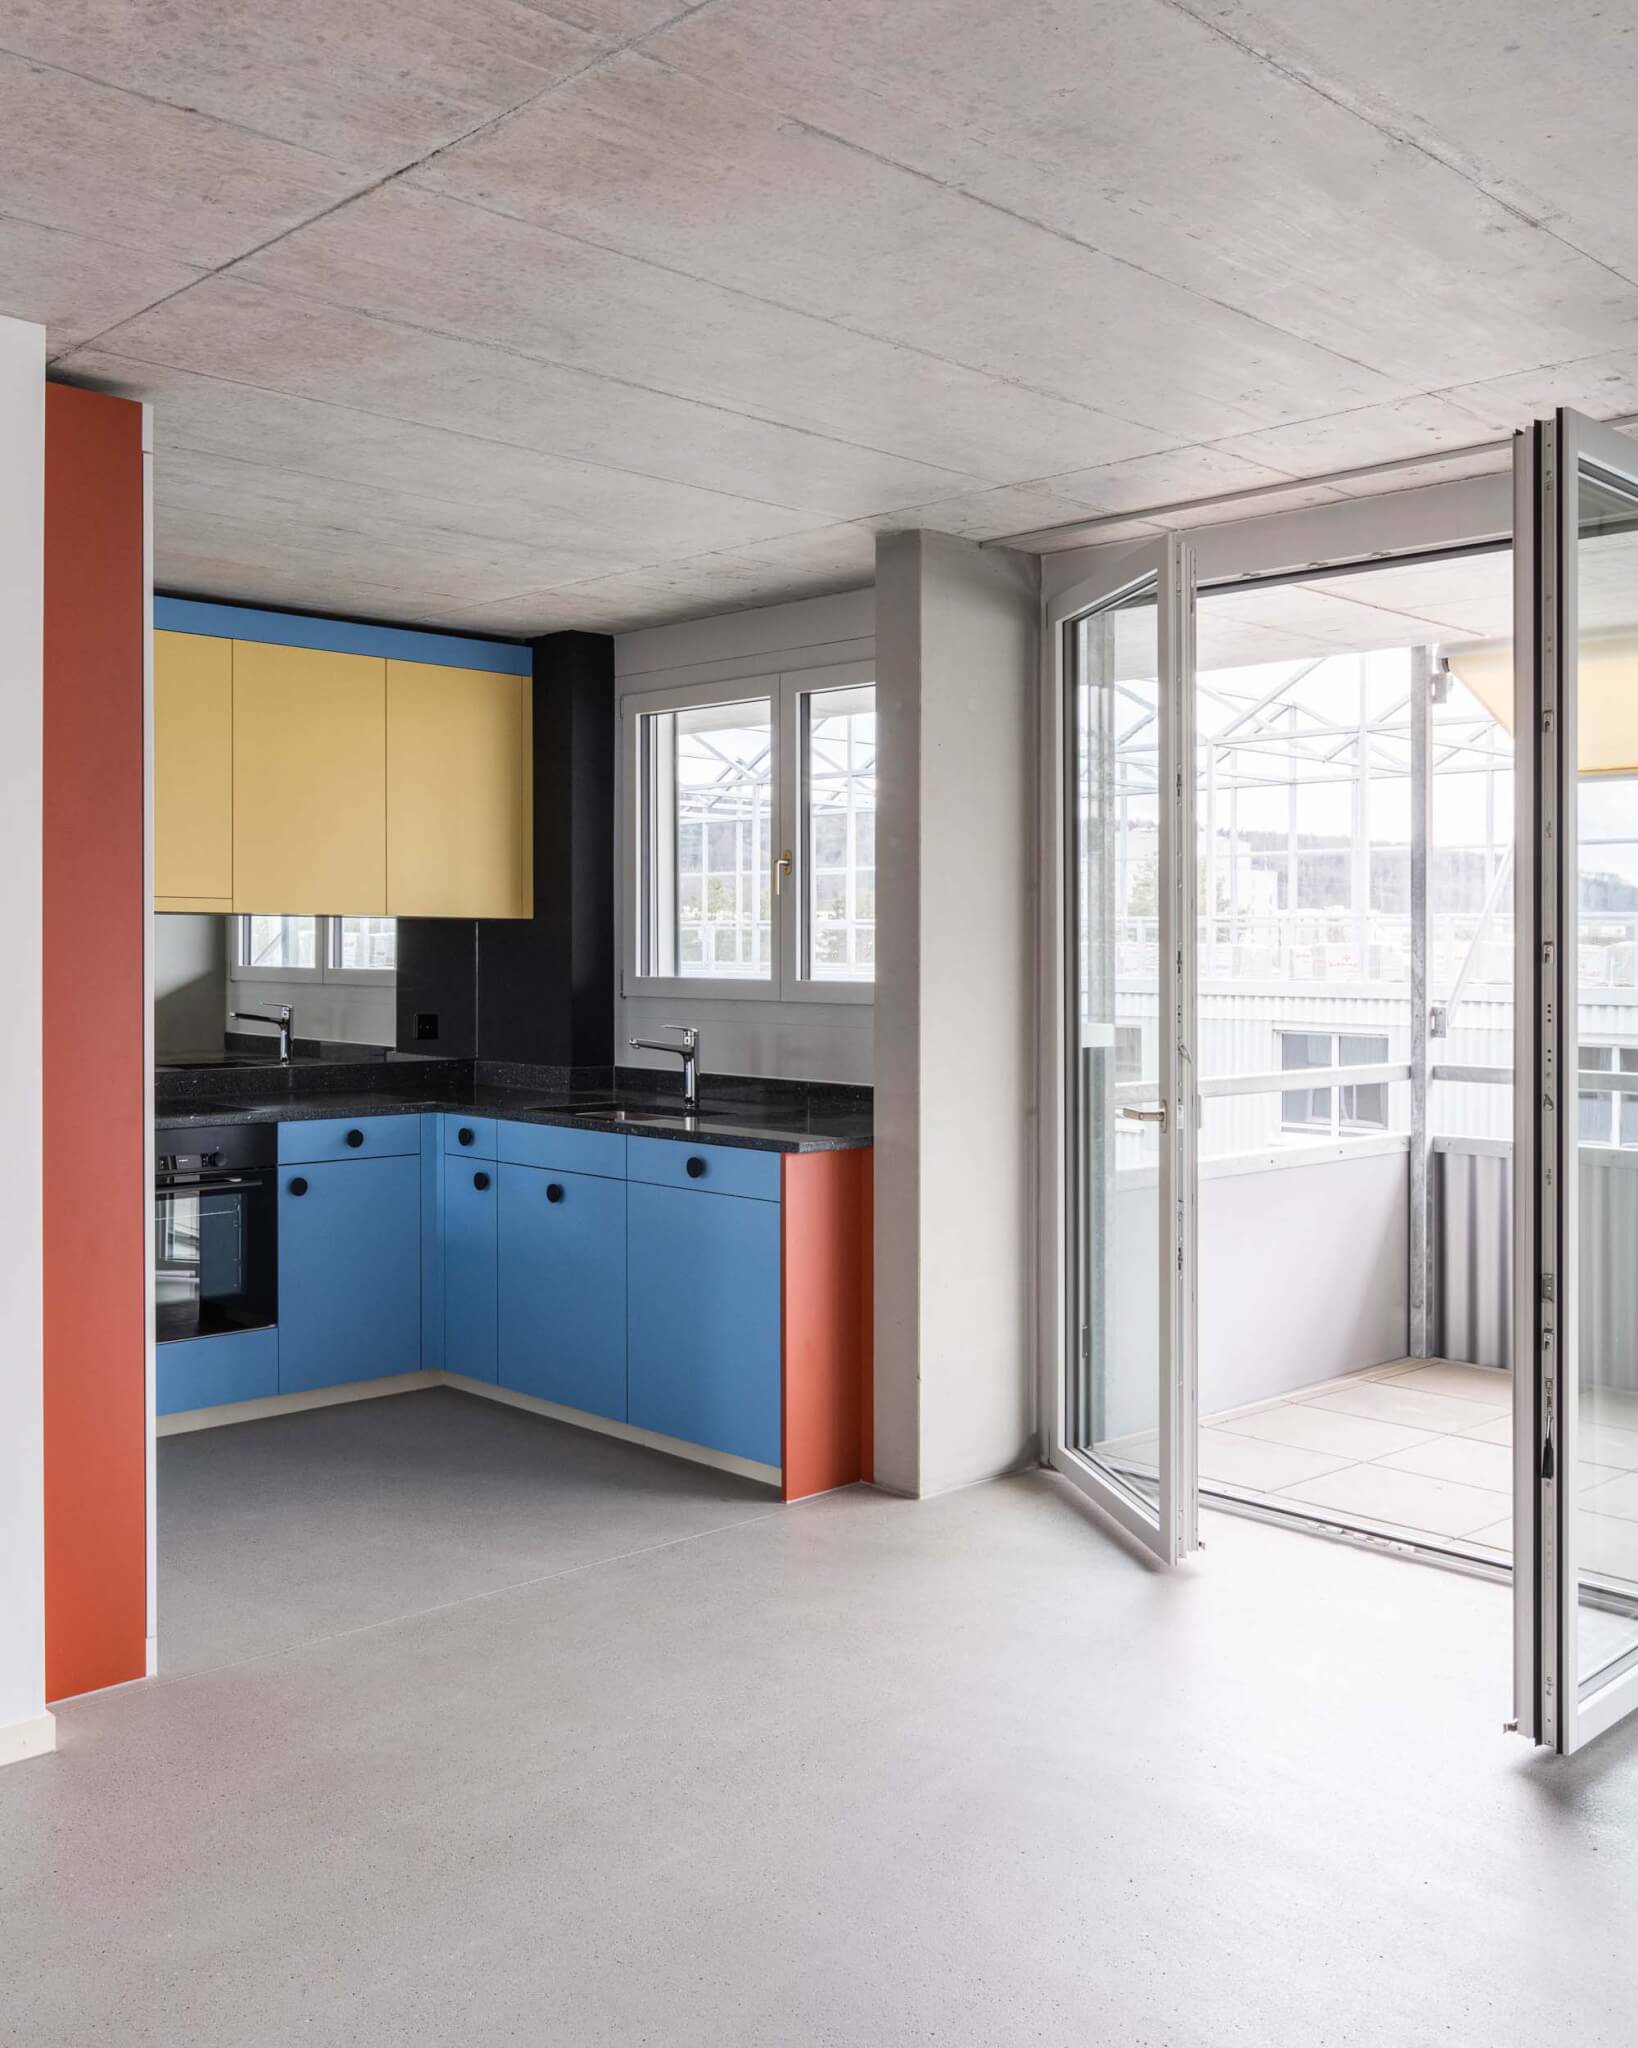 bold, primary-colored kitchen cabinets